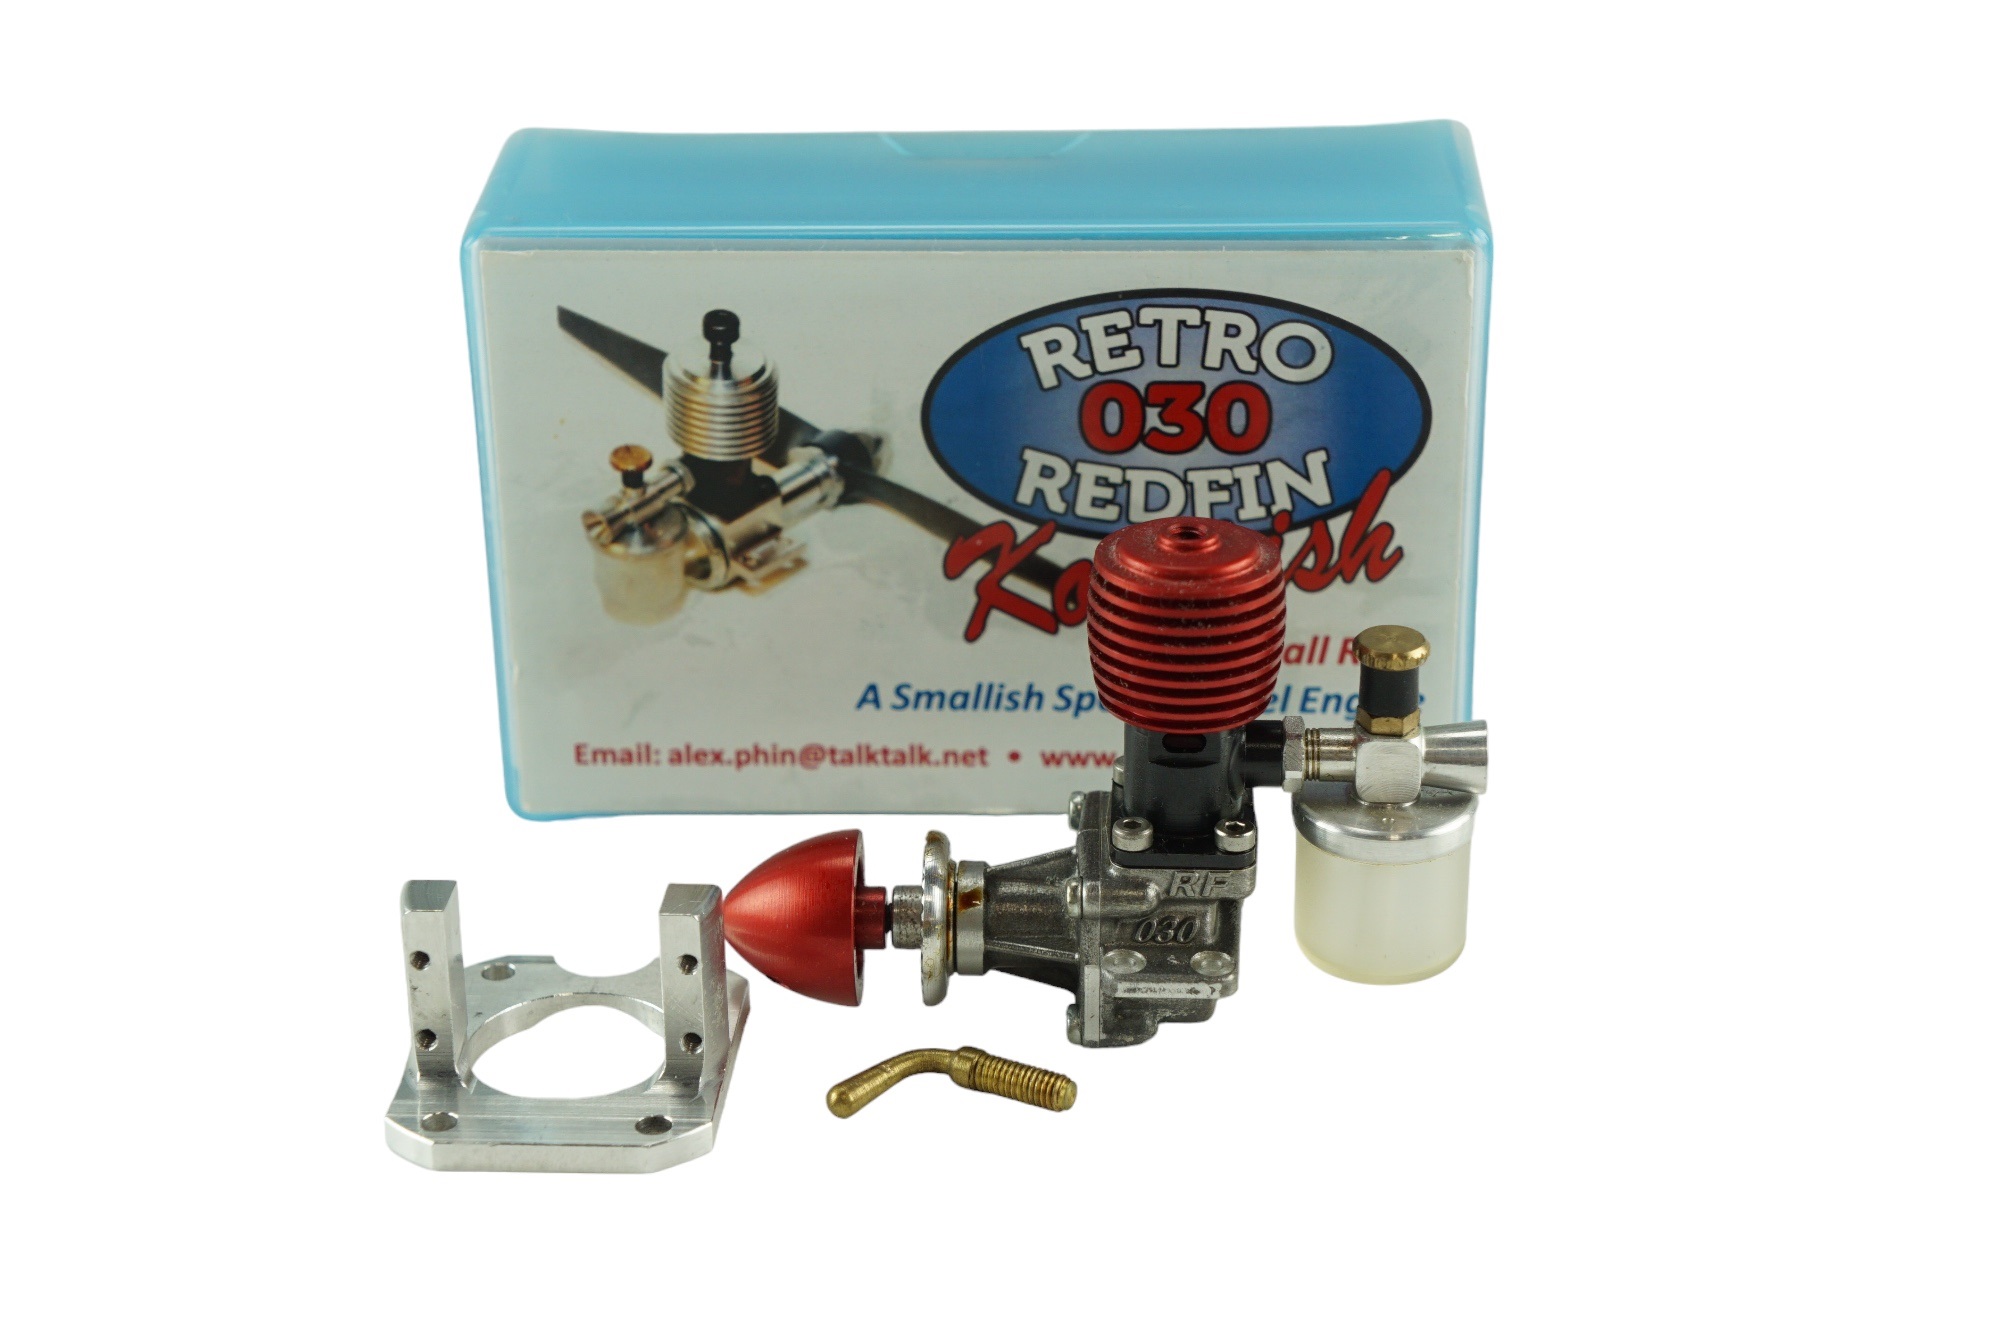 A boxed Redfin 030 Kompish aero model aircraft diesel engine, engine number 057